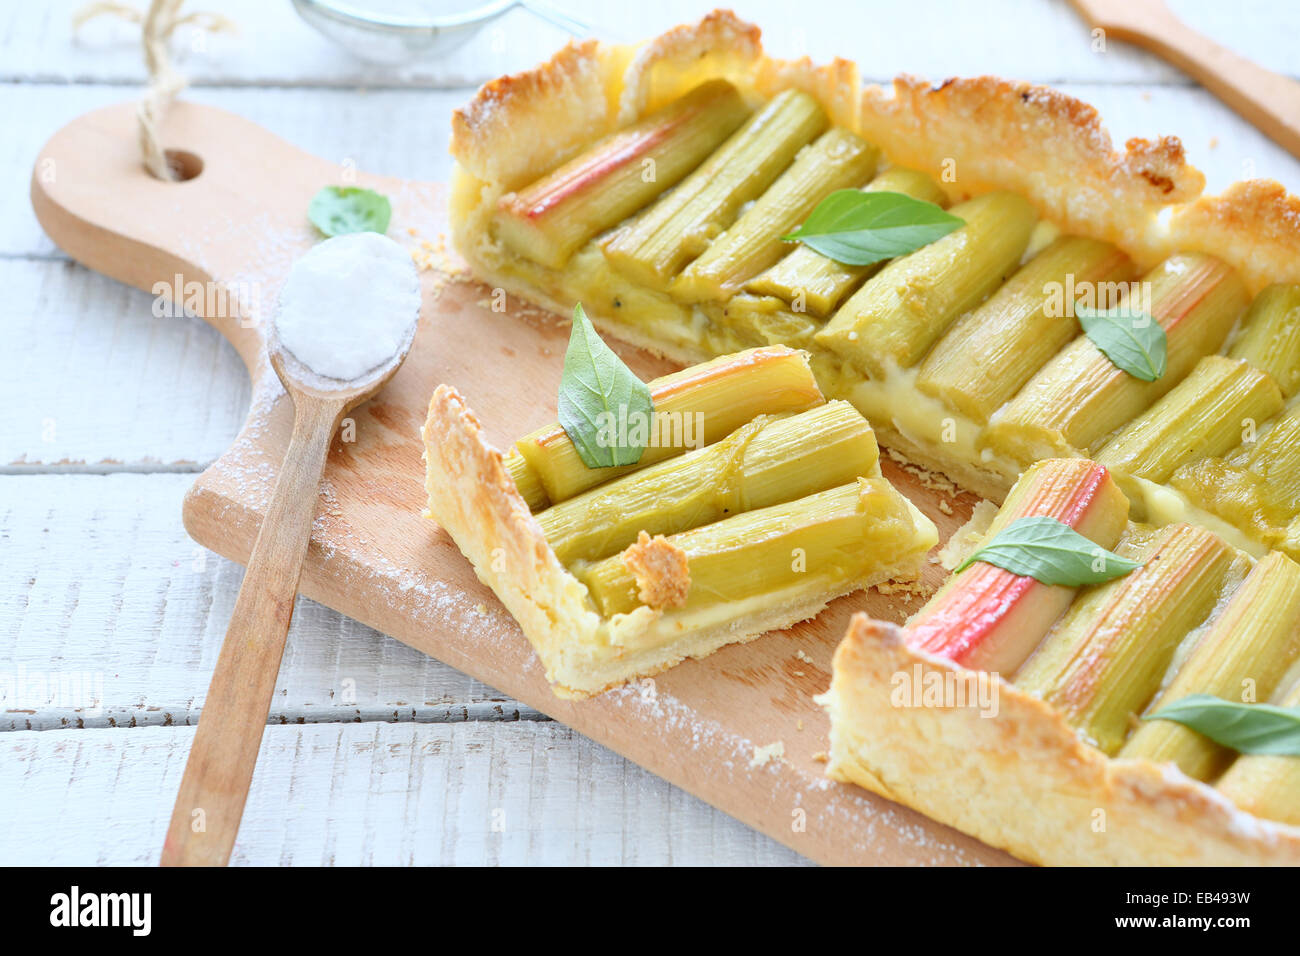 Slices of pie with rhubarb on a cutting board, tasty food Stock Photo